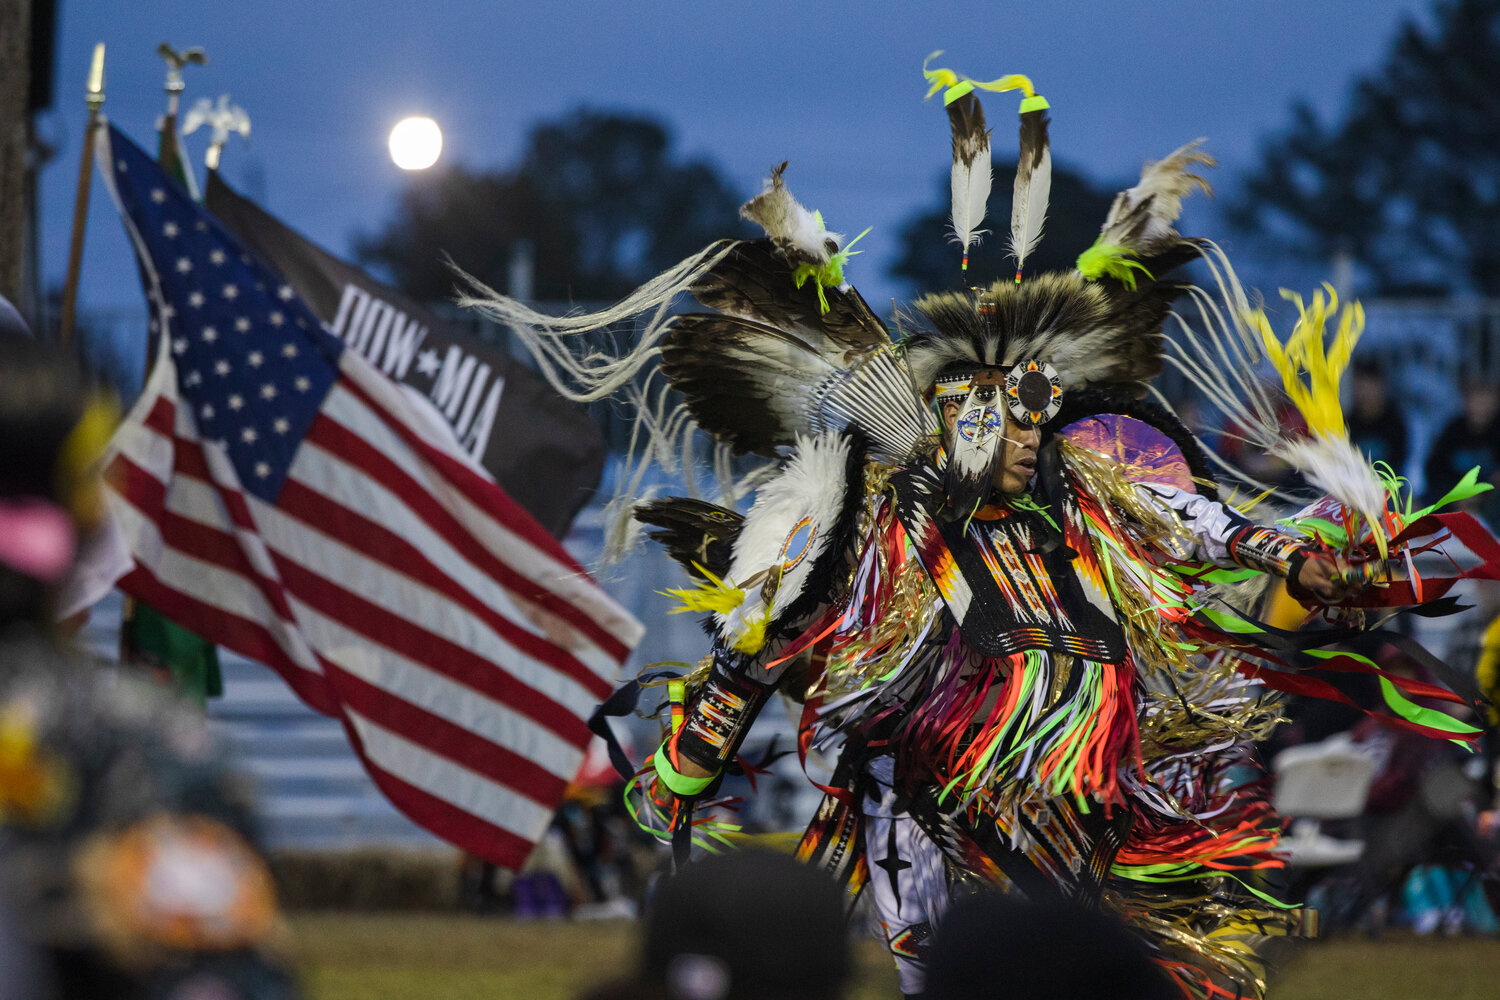 This year marks the 51st anniversary of the annual Pow Wow, which got its start in 1971 as a homecoming celebration for Tribal members.